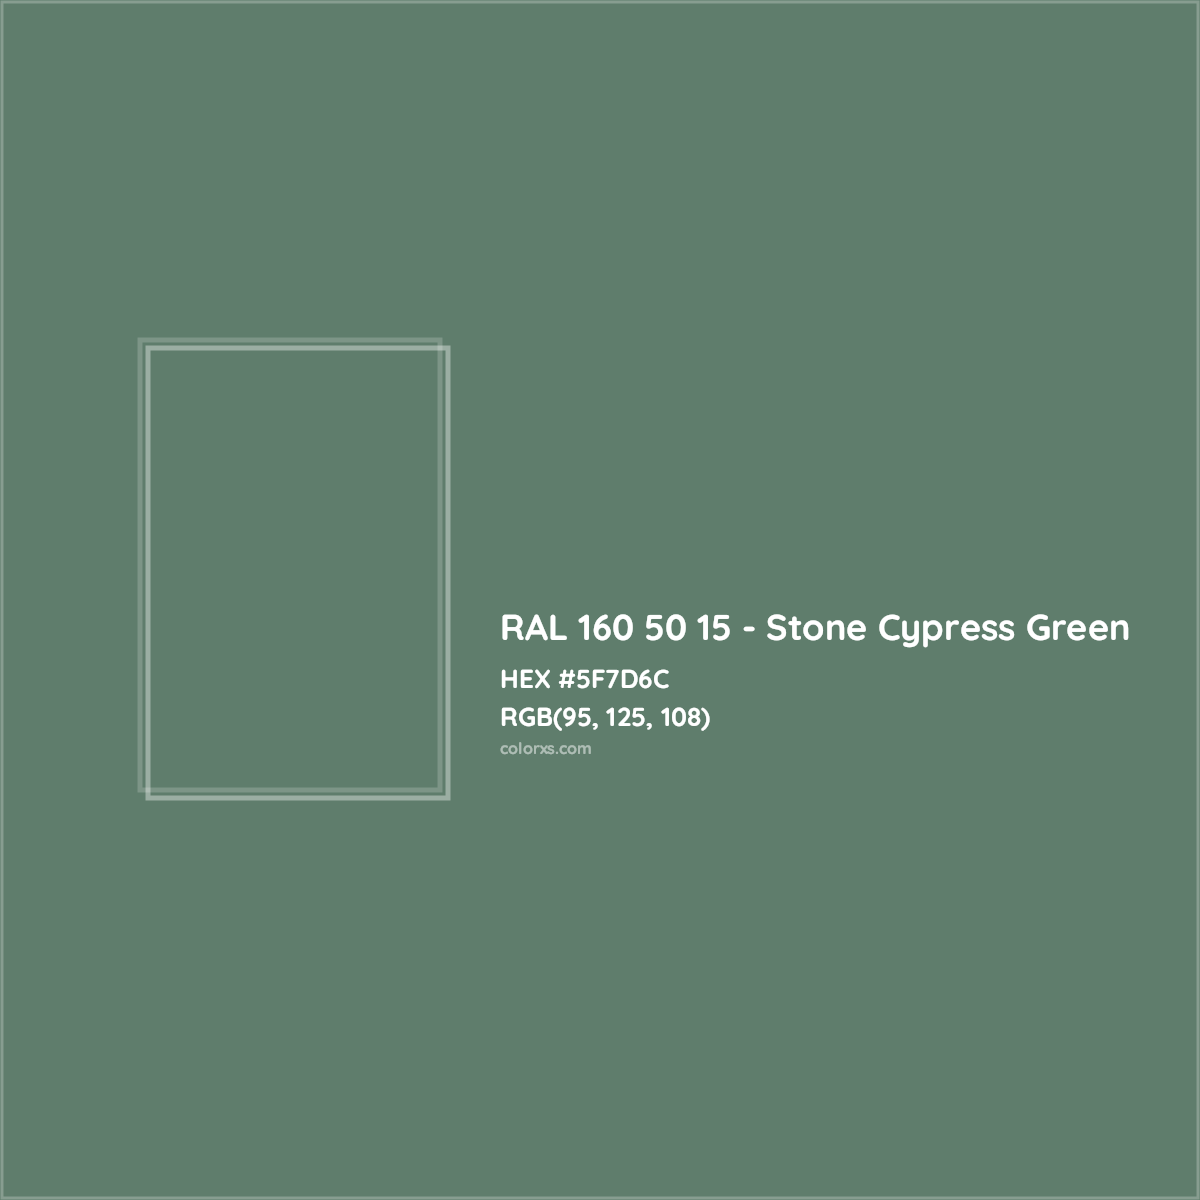 HEX #5F7D6C RAL 160 50 15 - Stone Cypress Green CMS RAL Design - Color Code